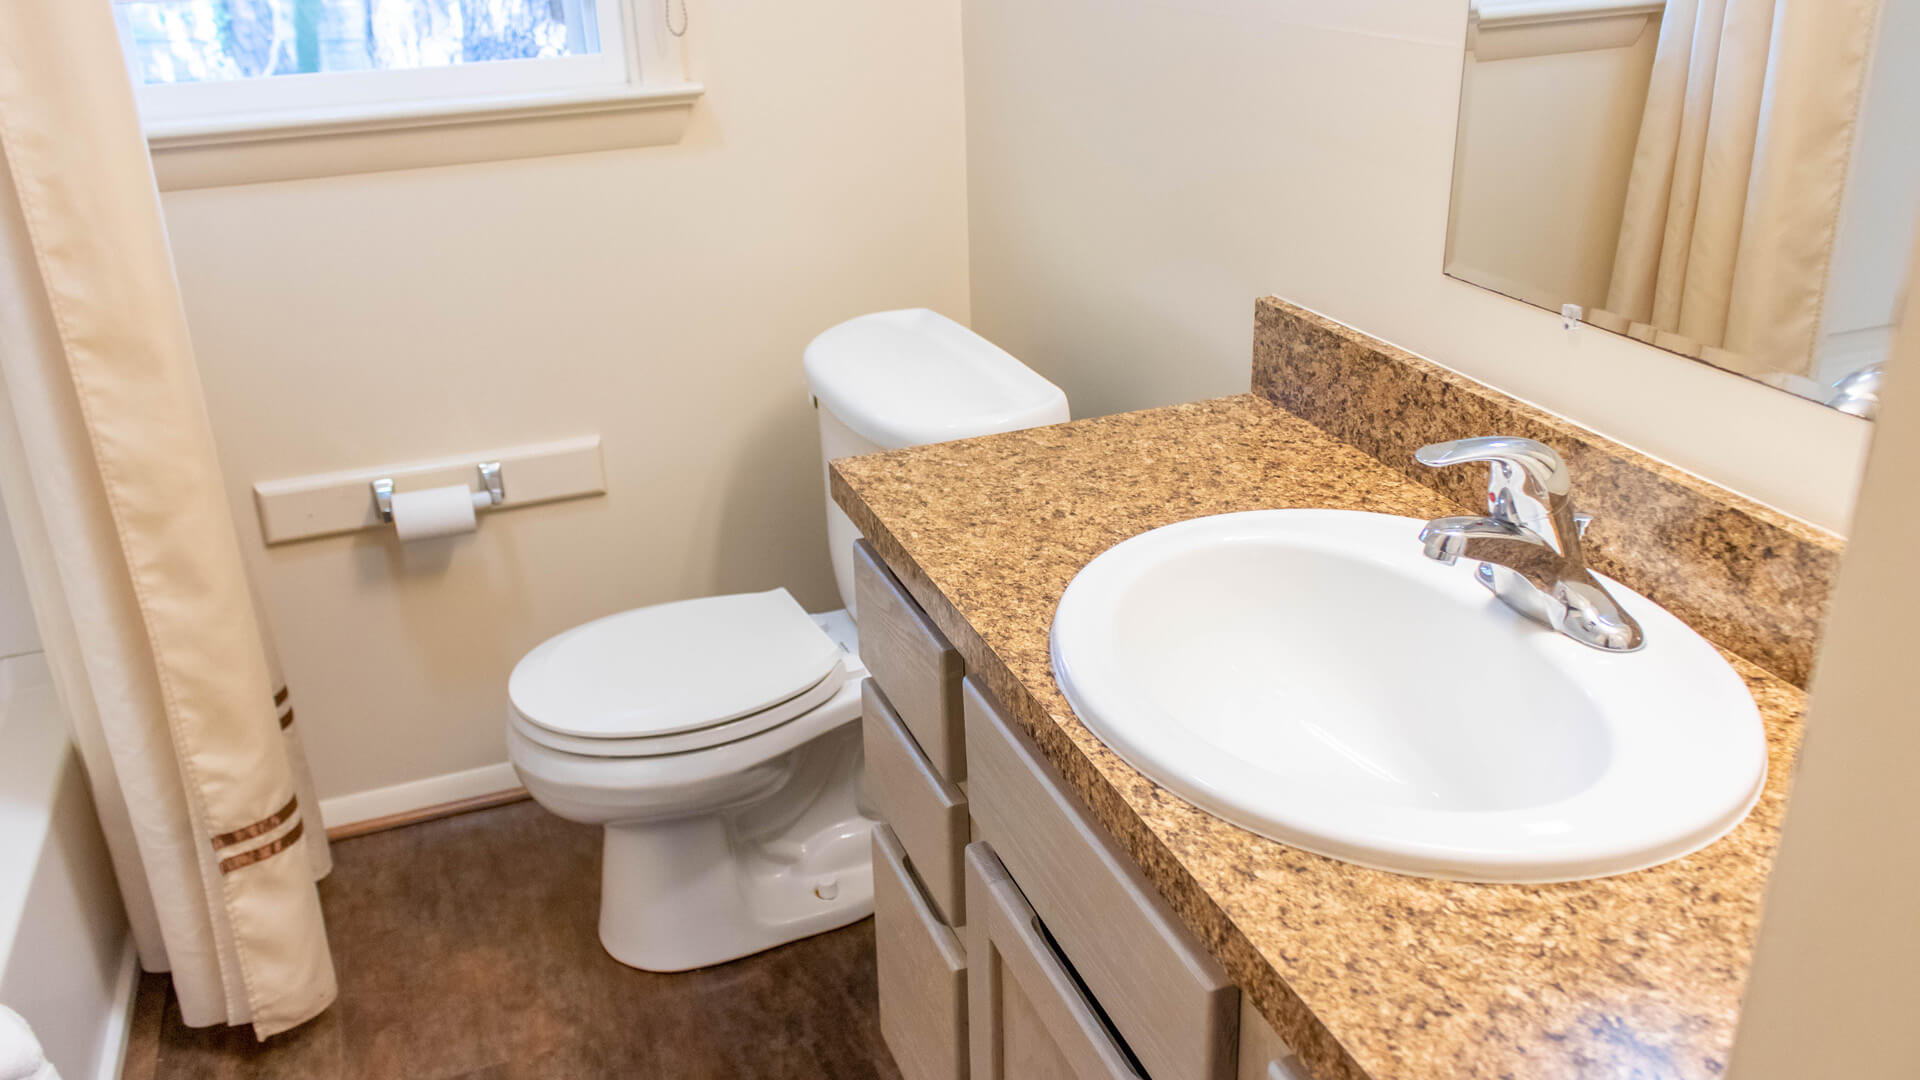 Vacation Homes 600-613 room with bathroom sink and toilet